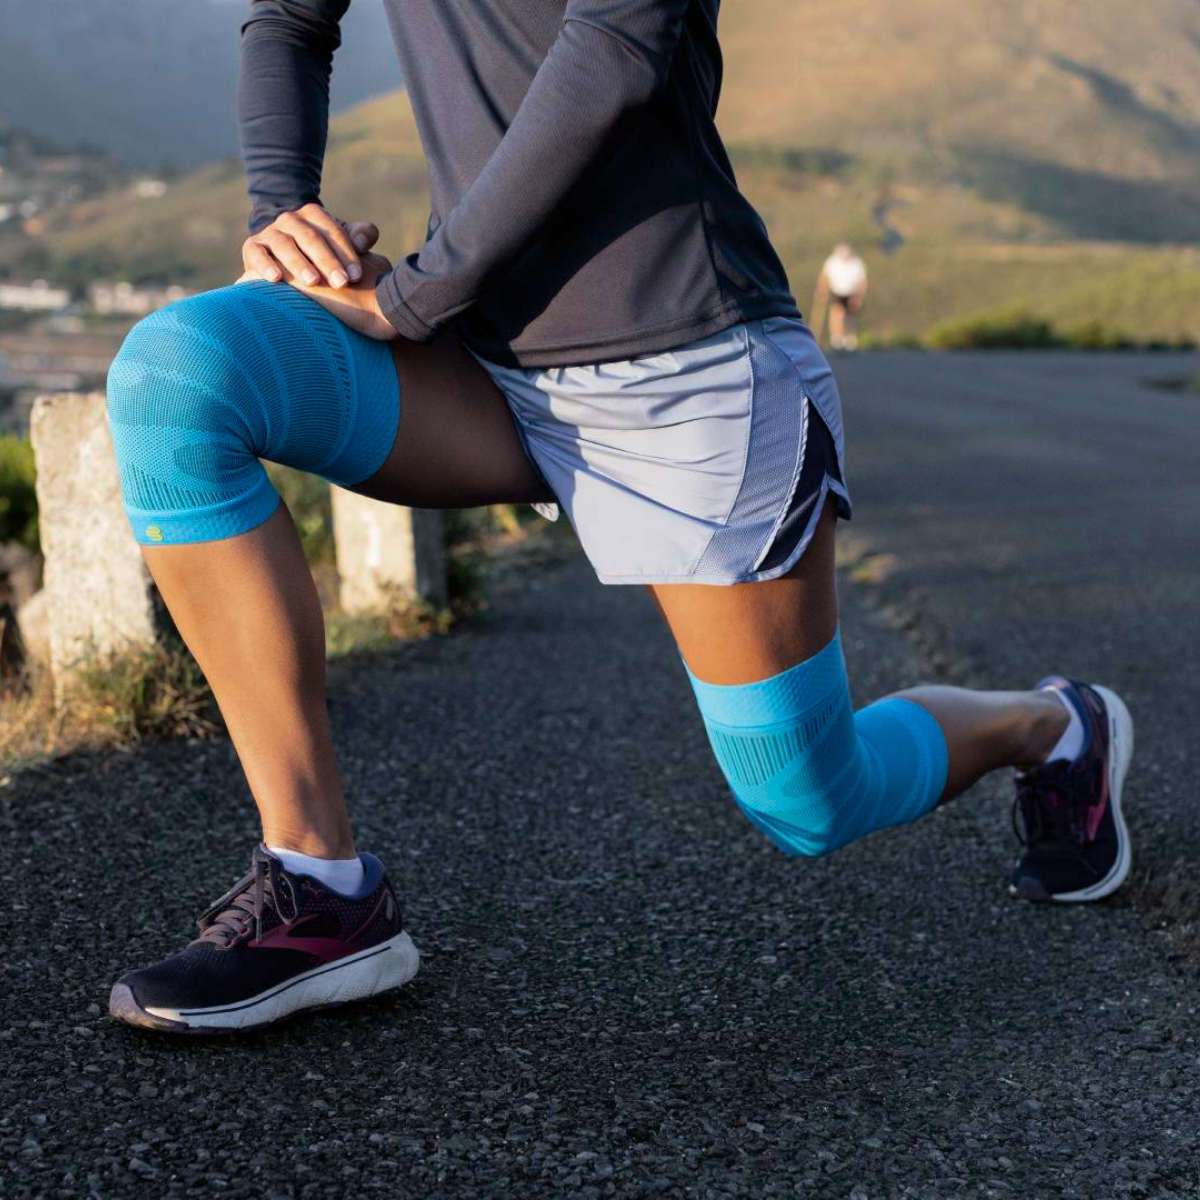 RUNNING COMPRESSION SLEEVES - BLUE